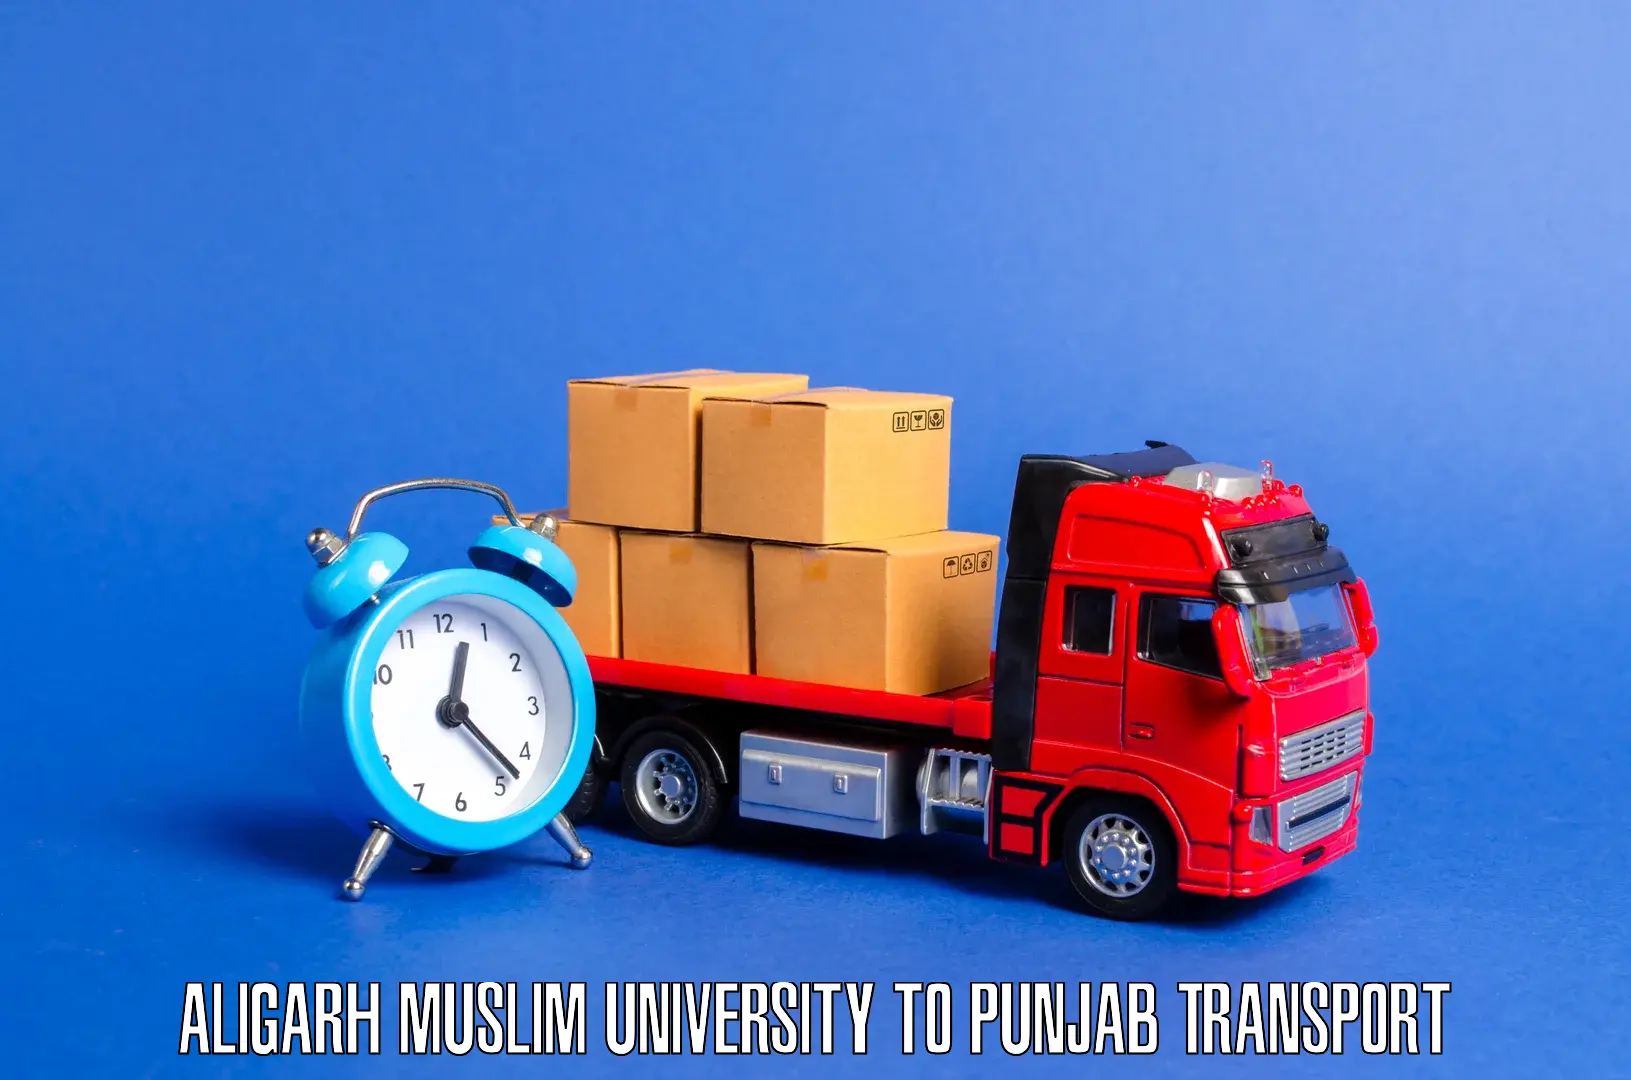 Goods delivery service Aligarh Muslim University to Nangal